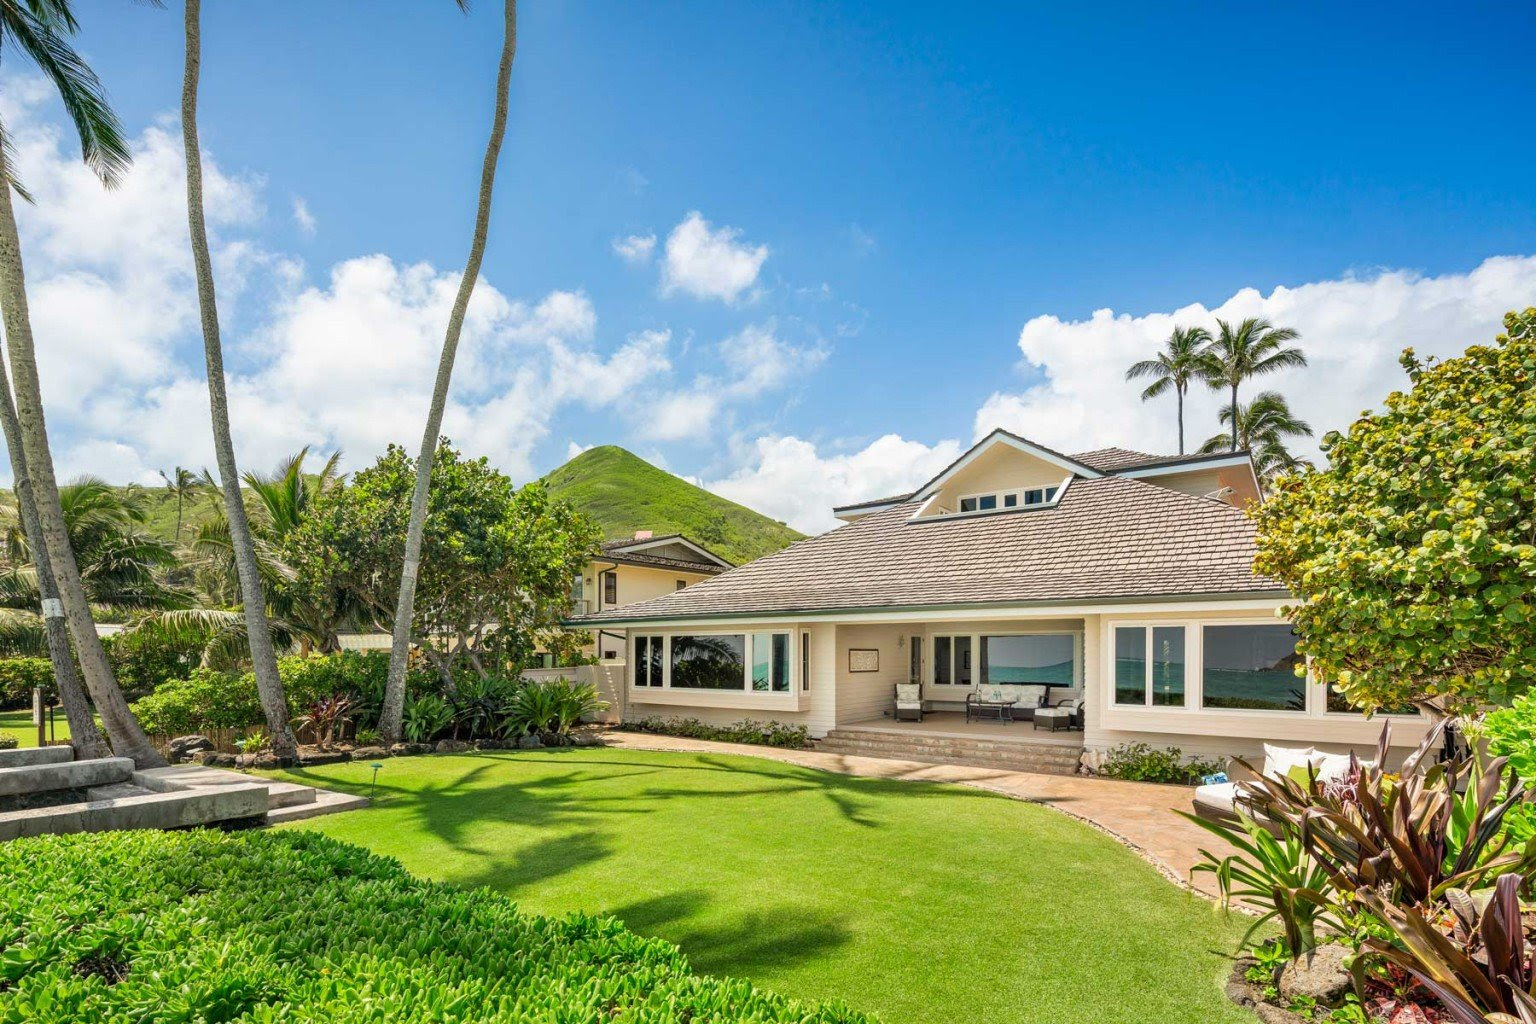 The sale of this oceanfront home in Lanikai closed on Jan. 31 for $10.89 million. | Photo: Coldwell Banker Realty and Island Luxury Photography.